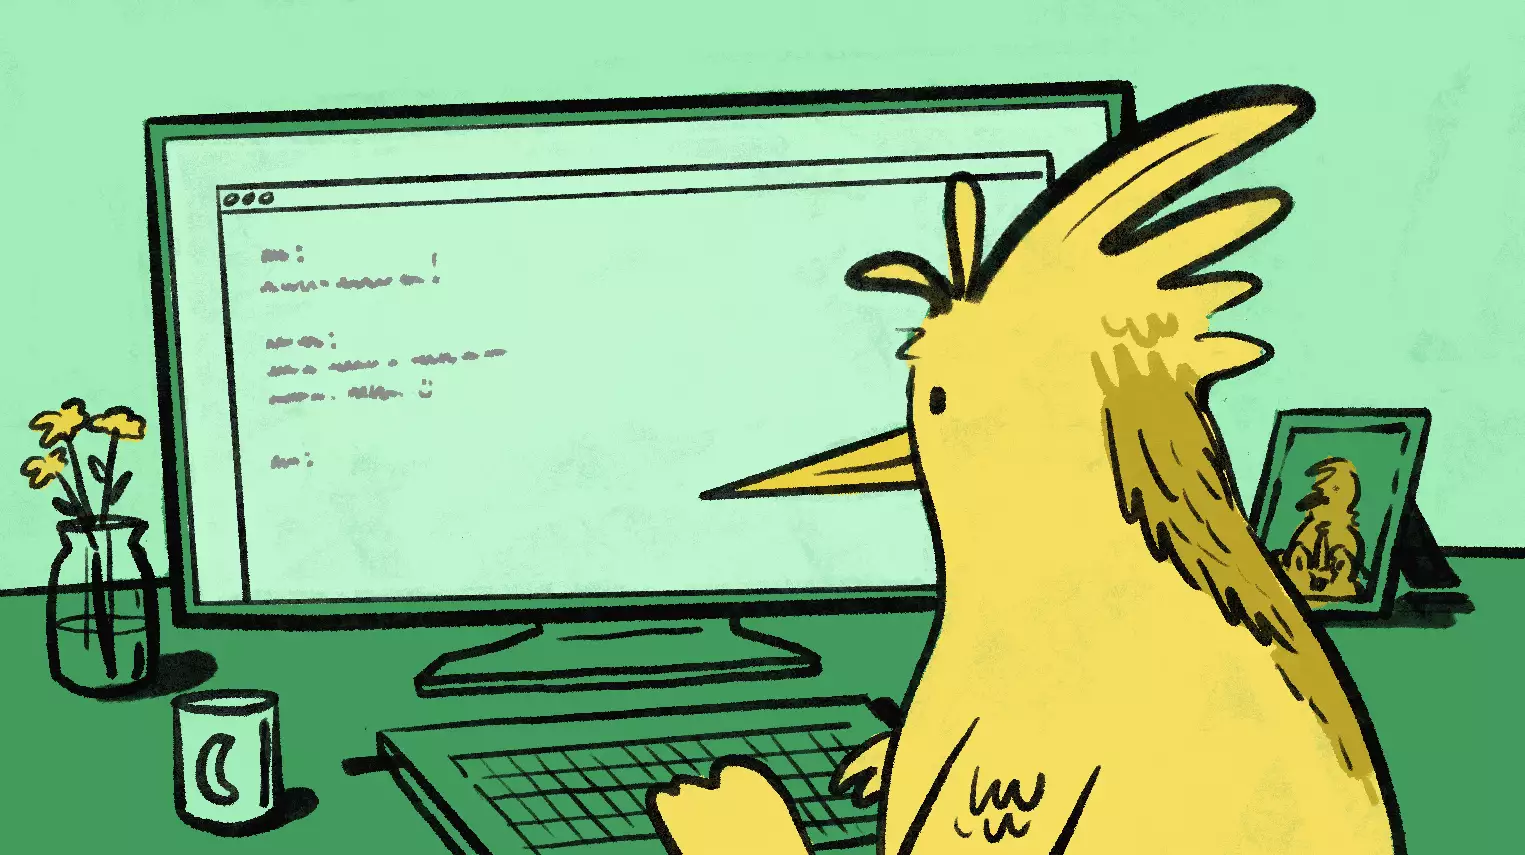 A Fly bird using a chat application on their computer screen.